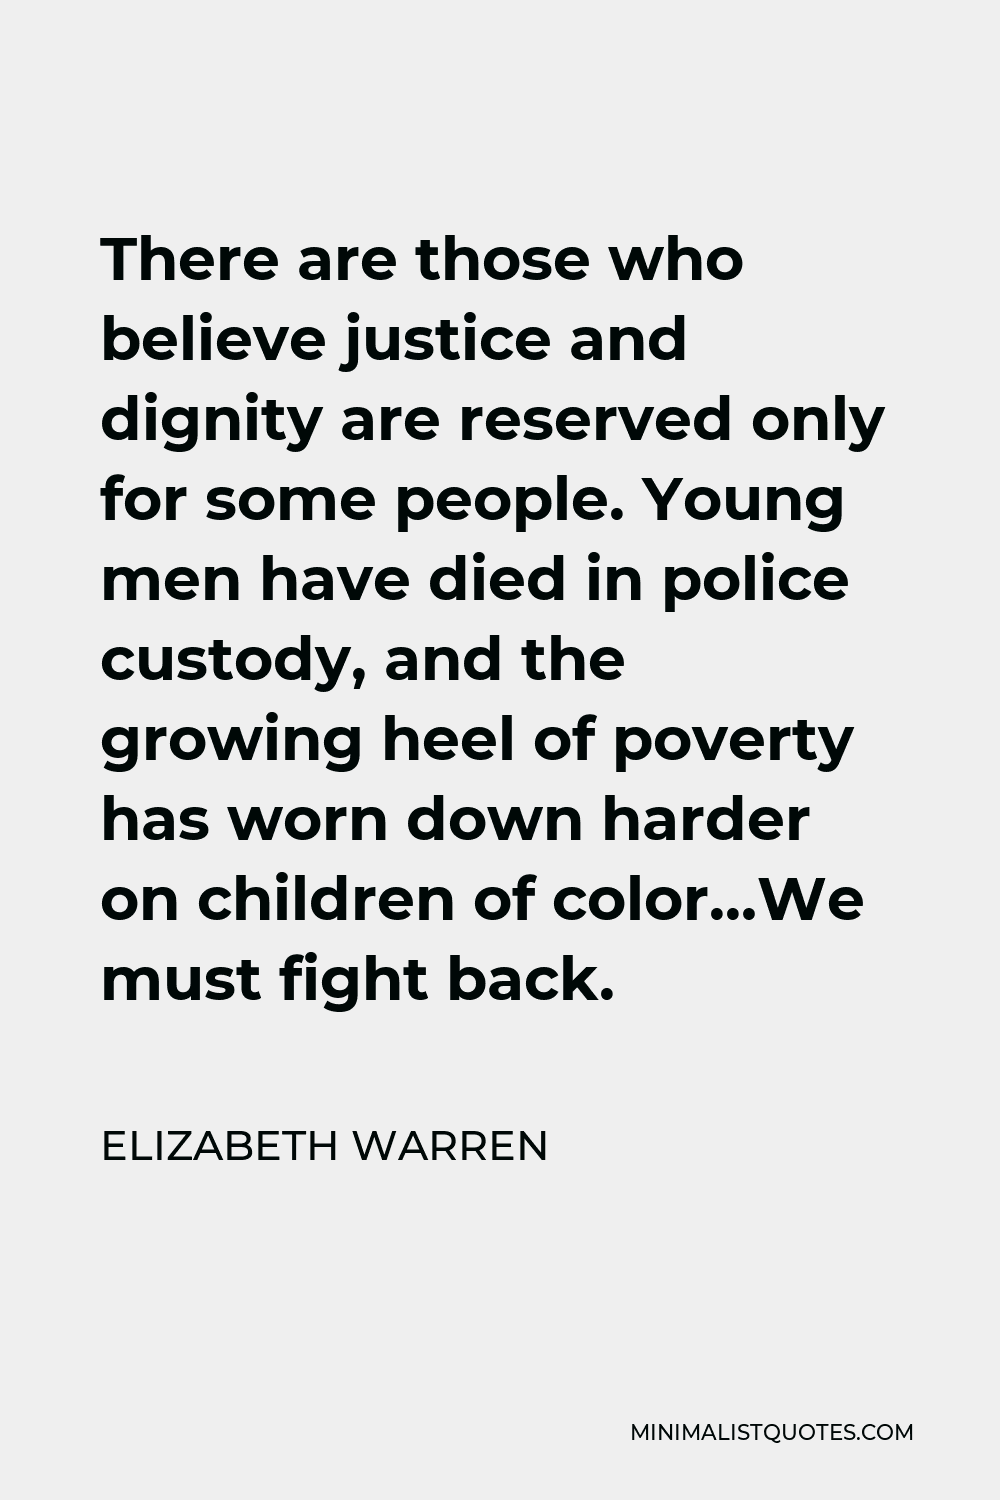 Elizabeth Warren Quote - There are those who believe justice and dignity are reserved only for some people. Young men have died in police custody, and the growing heel of poverty has worn down harder on children of color…We must fight back.